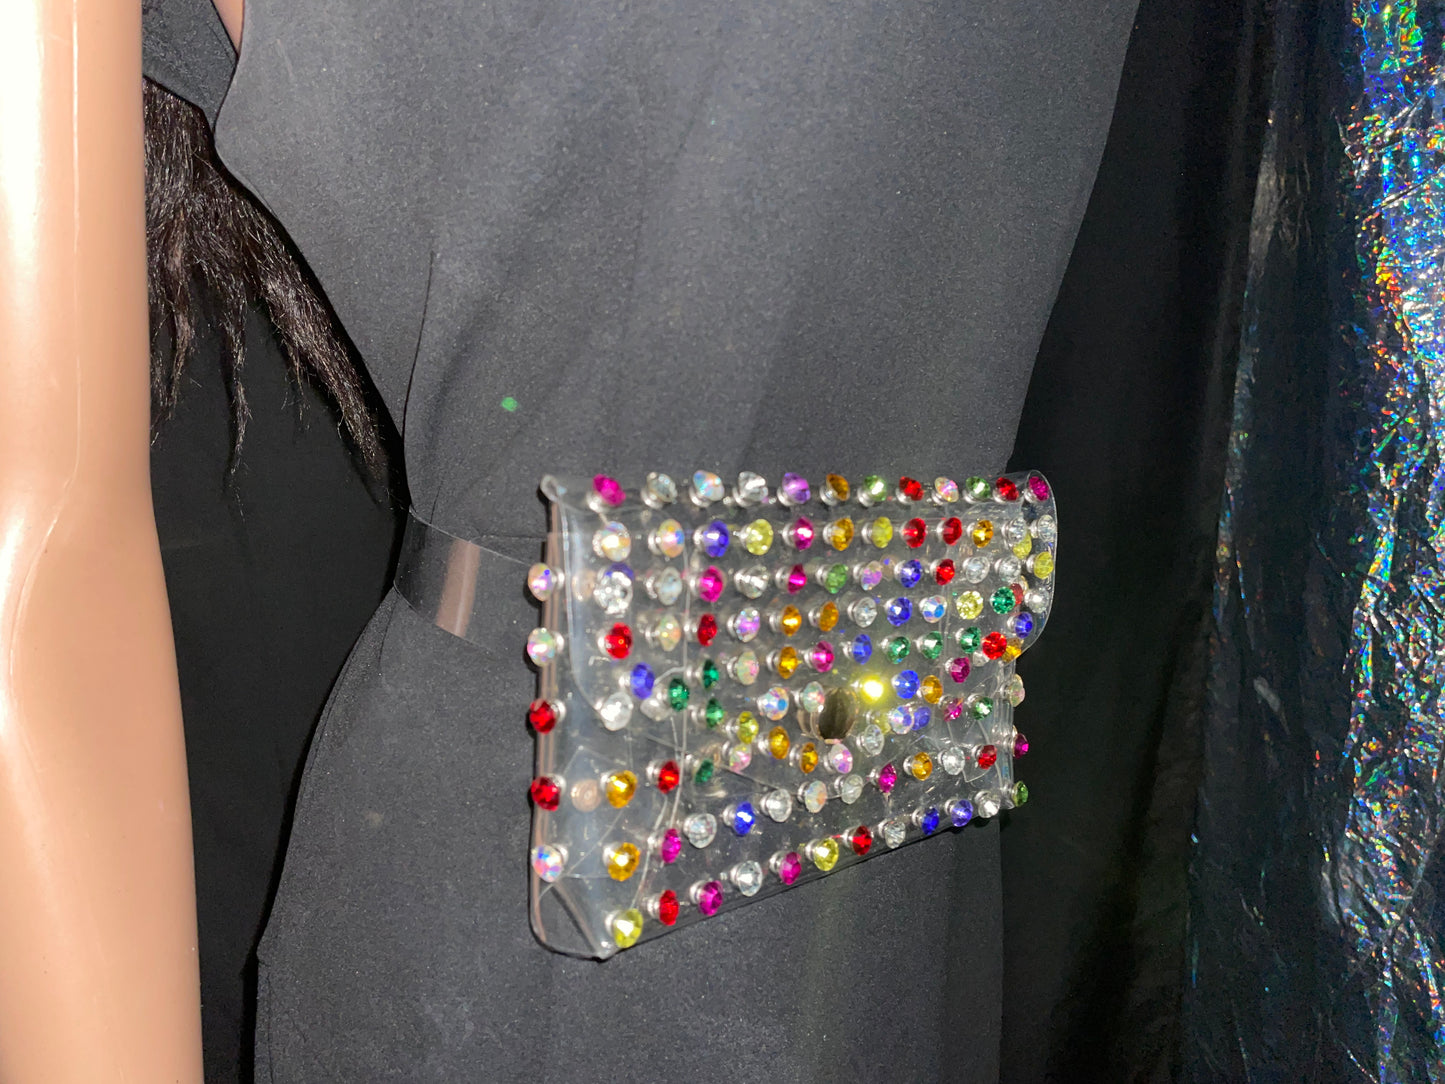 Clearly Gems Waist pouch